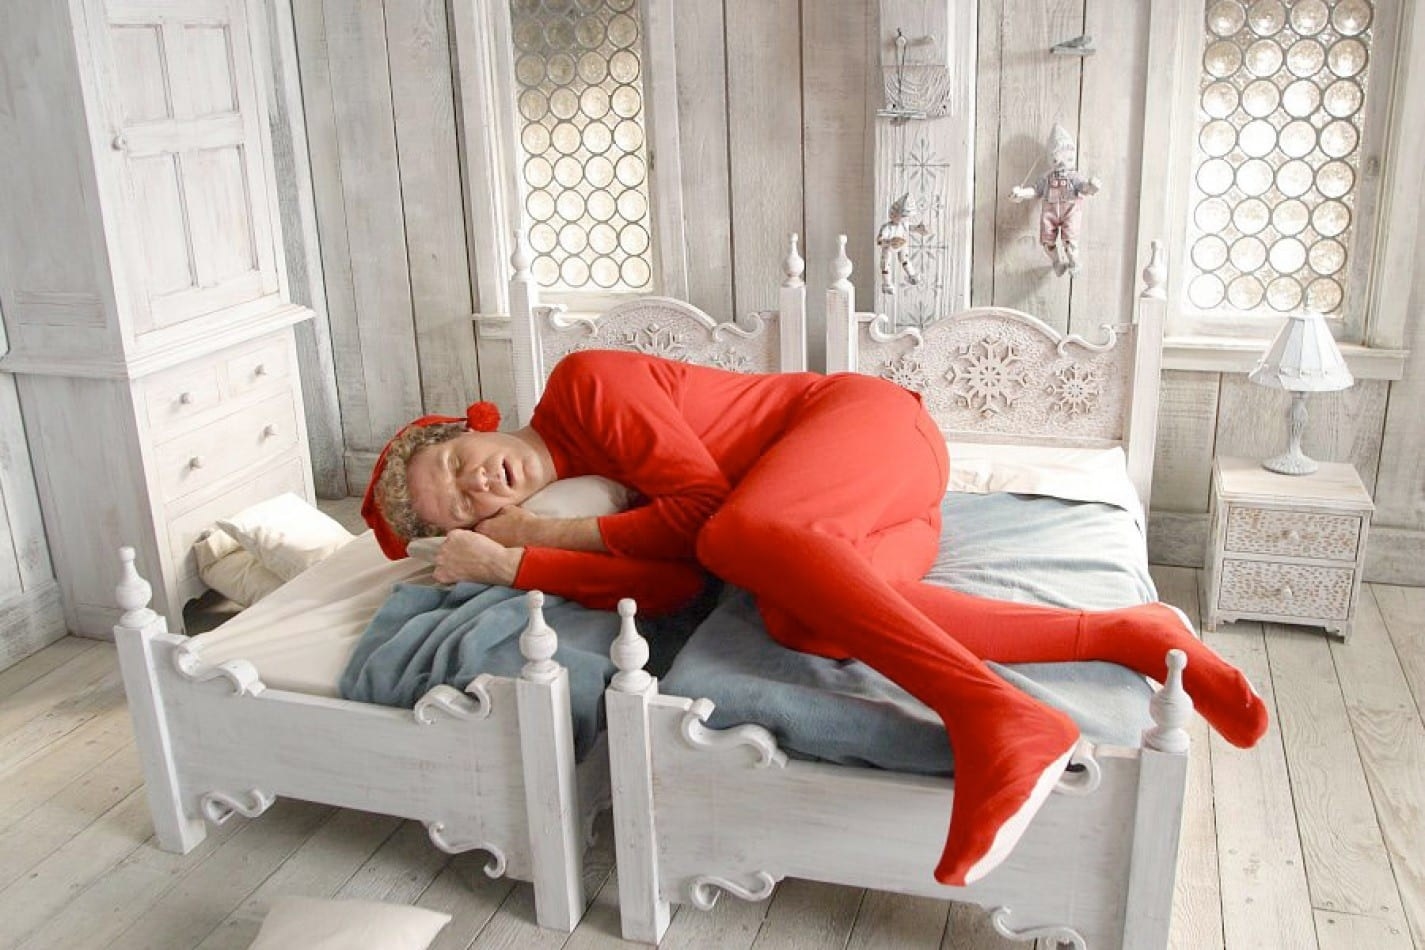 Will Ferrell as Buddy the Elf in Elf curled up across two beds sideways in the fetal position